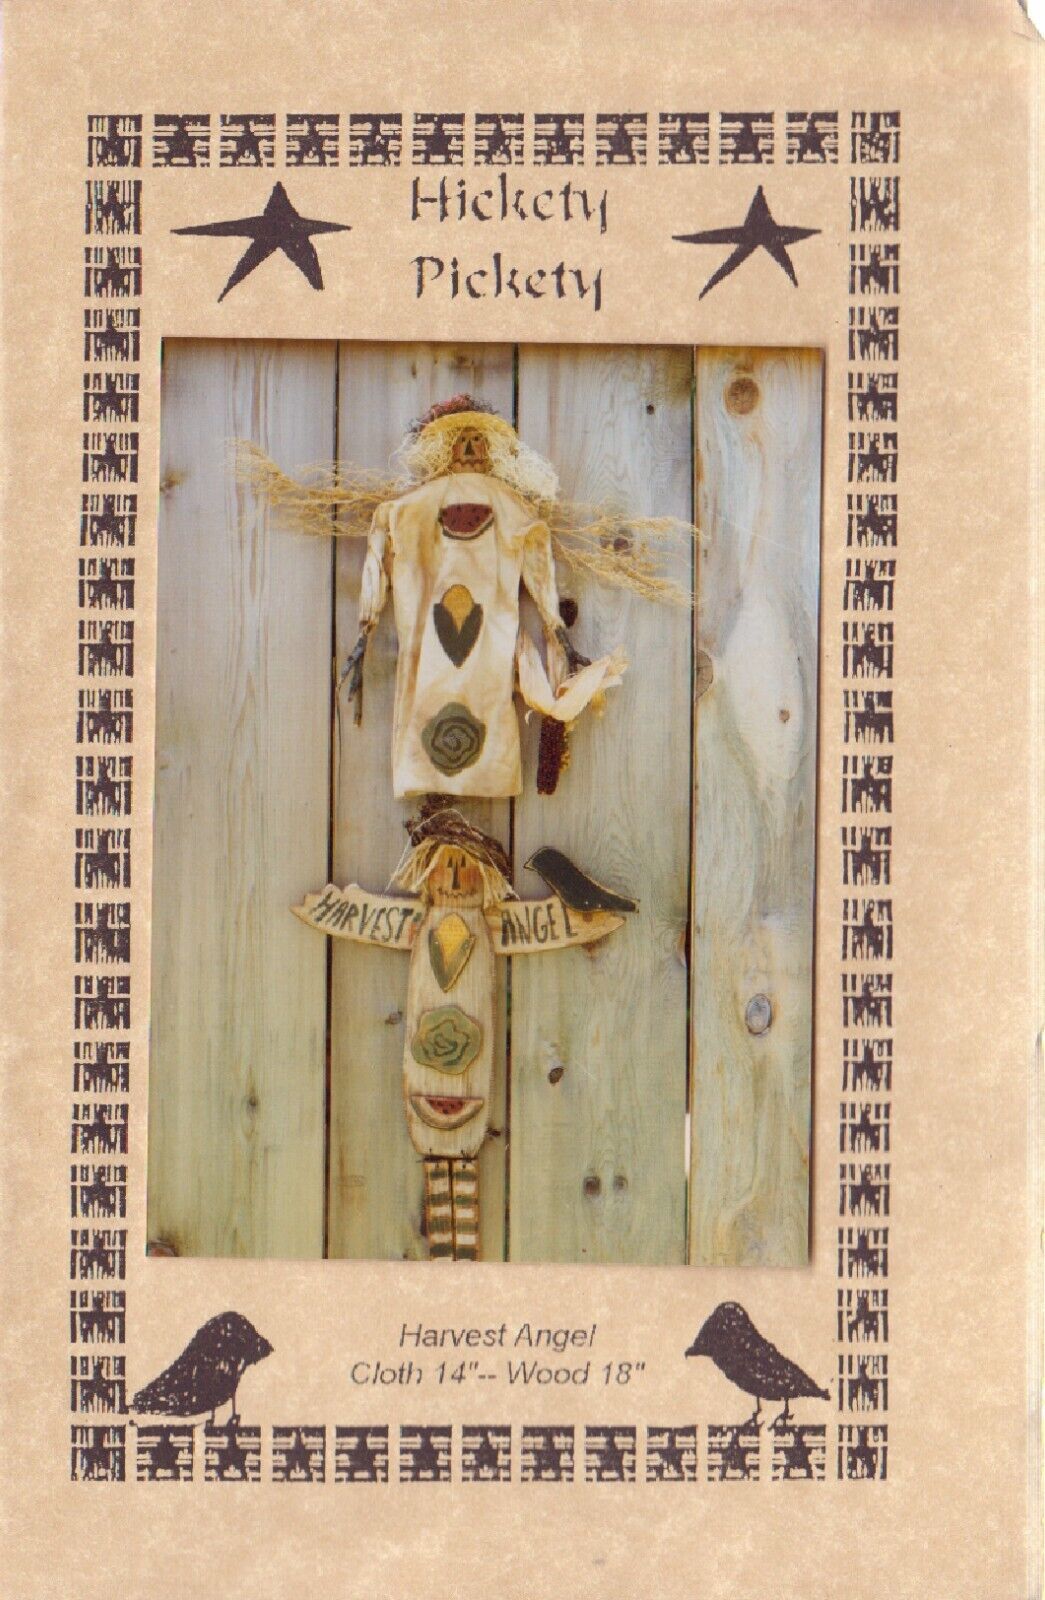 HICKETY PICKETY HARVEST ANGEL NO. 050 UNCUT NATIVE AMERICAN THEME